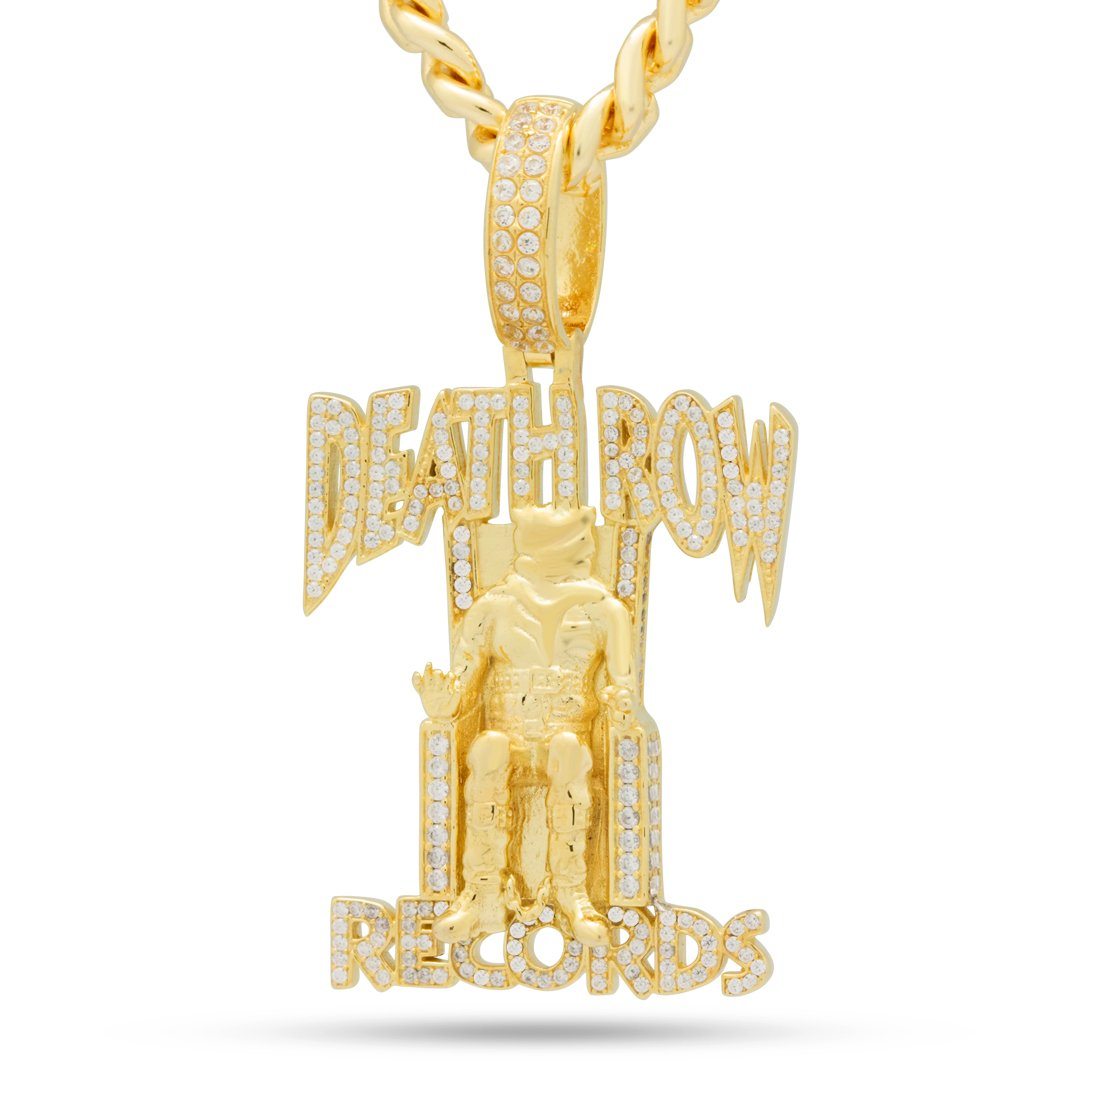 King Ice x Death Row Records Iced Necklace